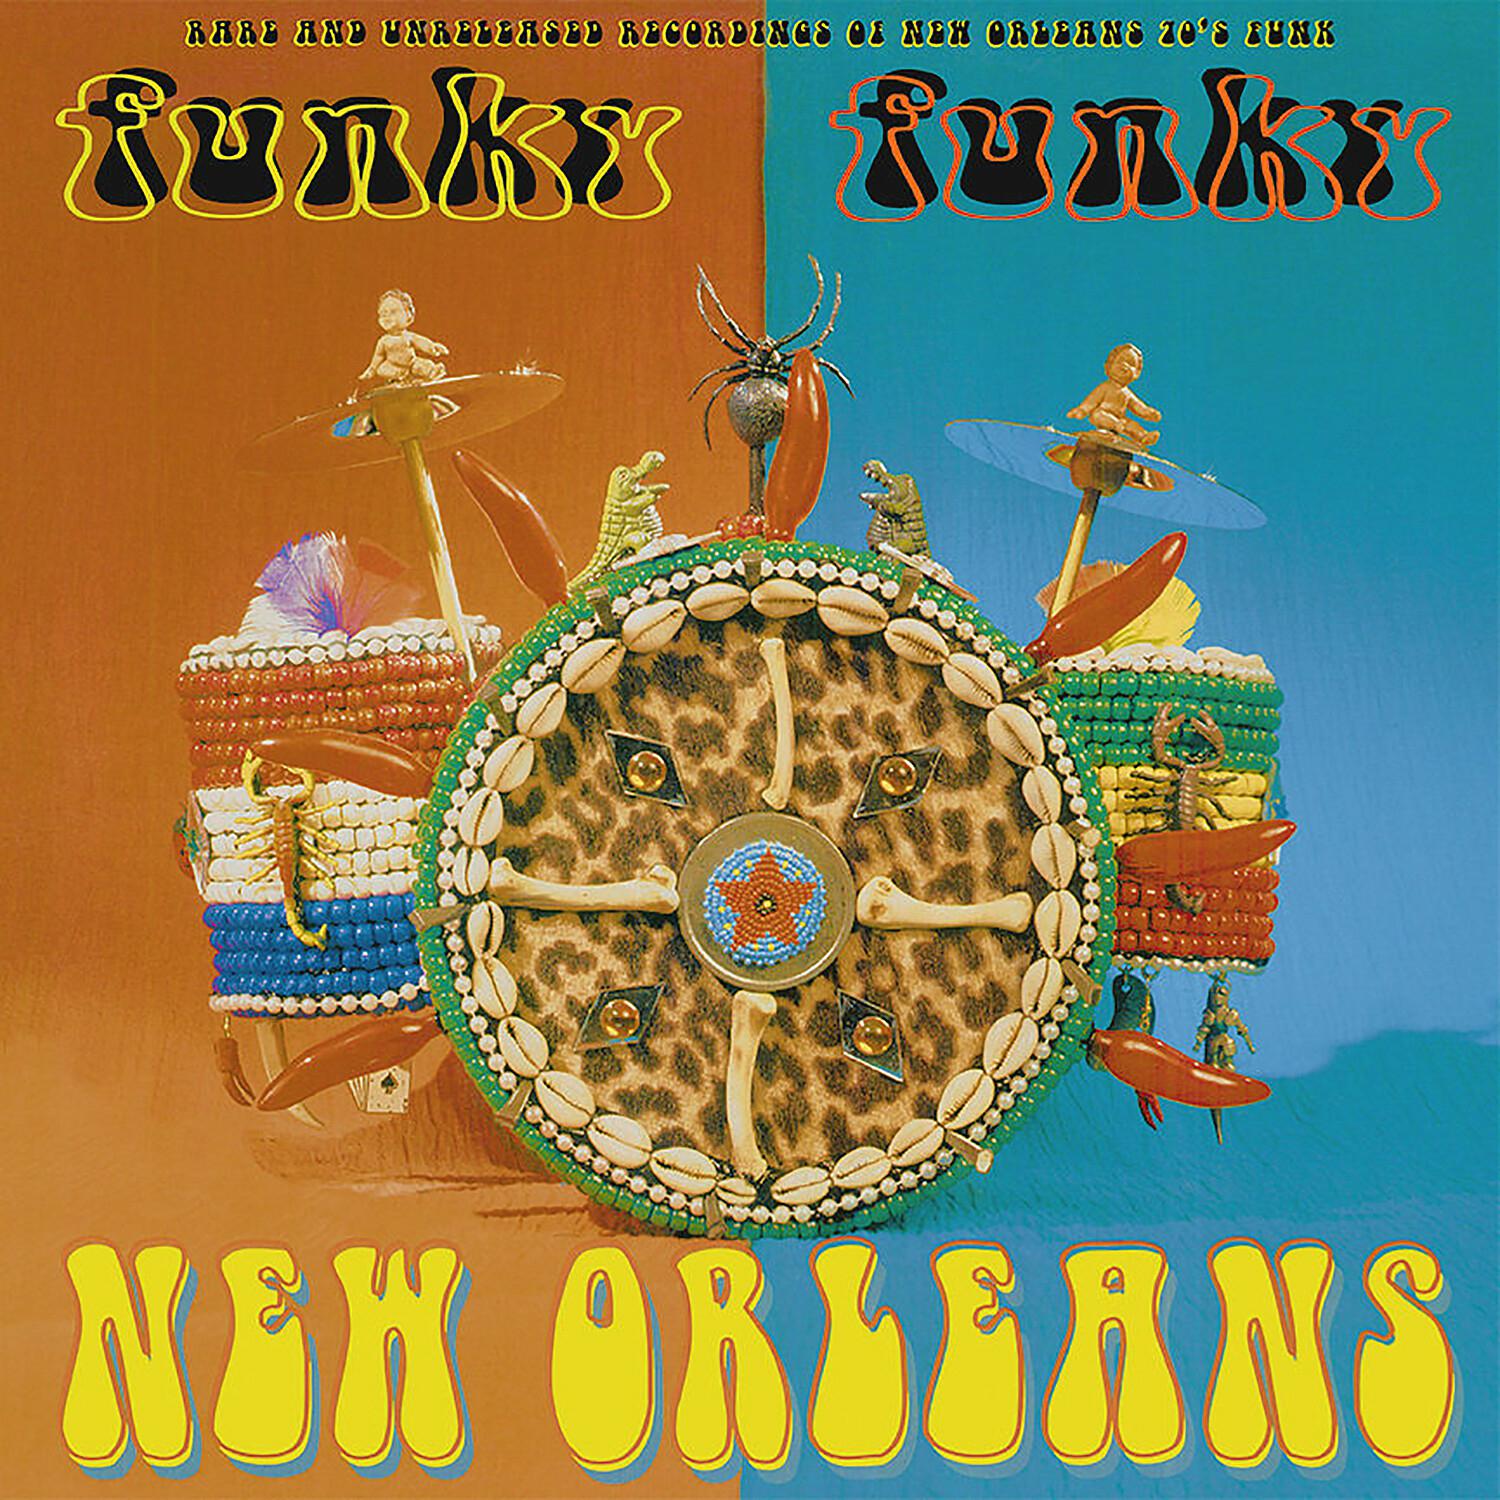 Funky Funky New Orleans